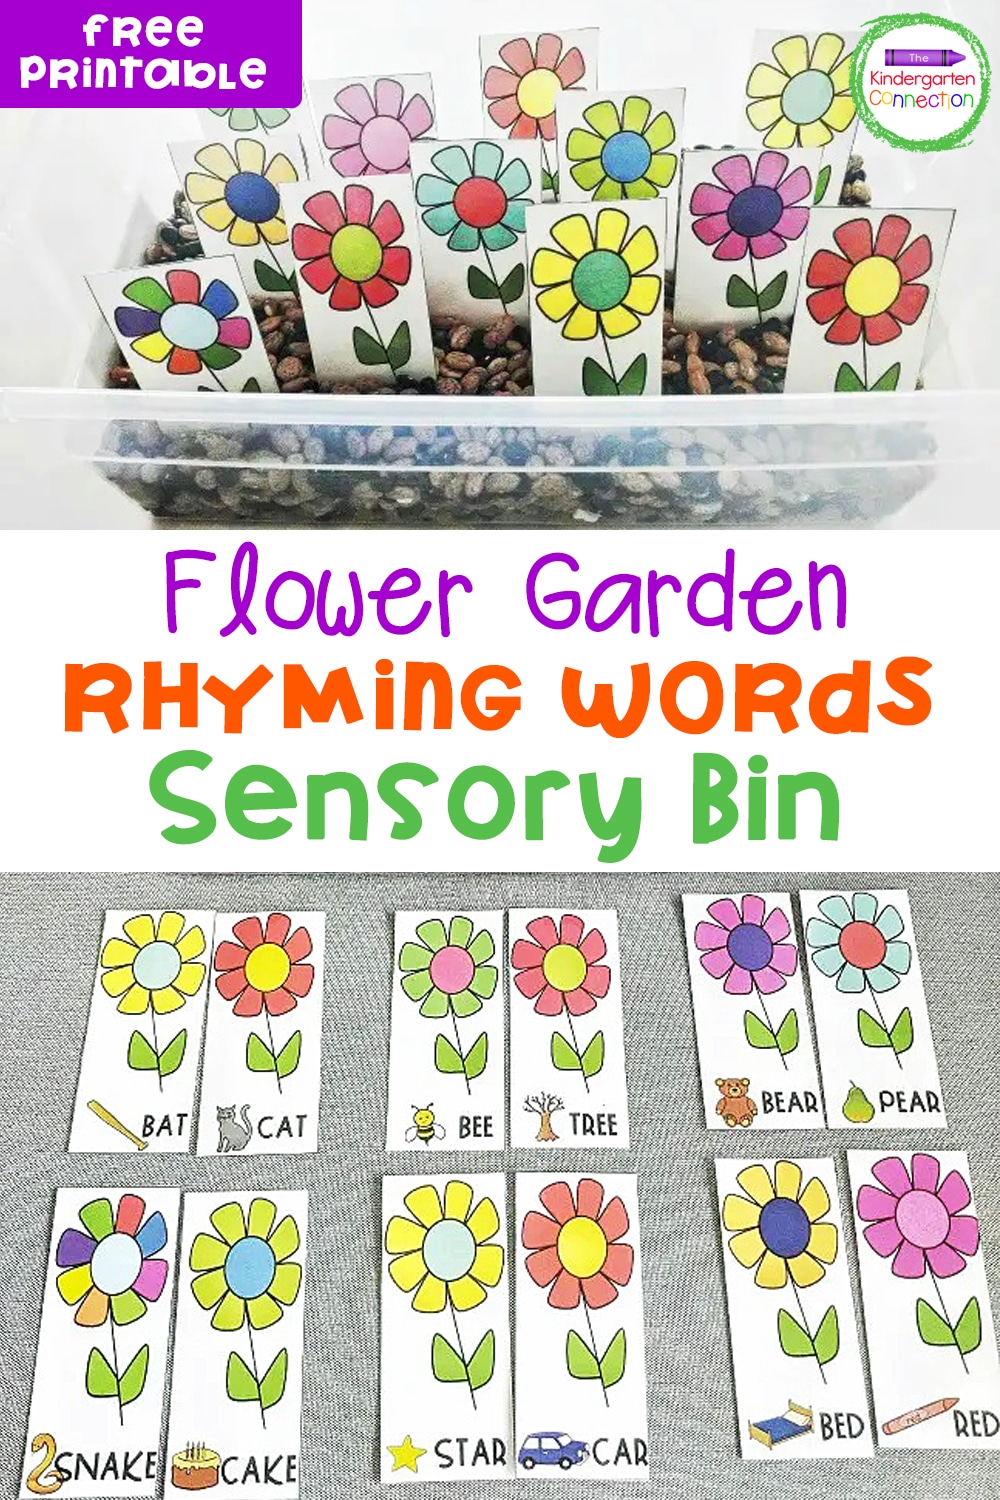 This free Flower Garden Rhyming Words Sensory Bin Activity is perfect for your small groups or literacy centers this spring!